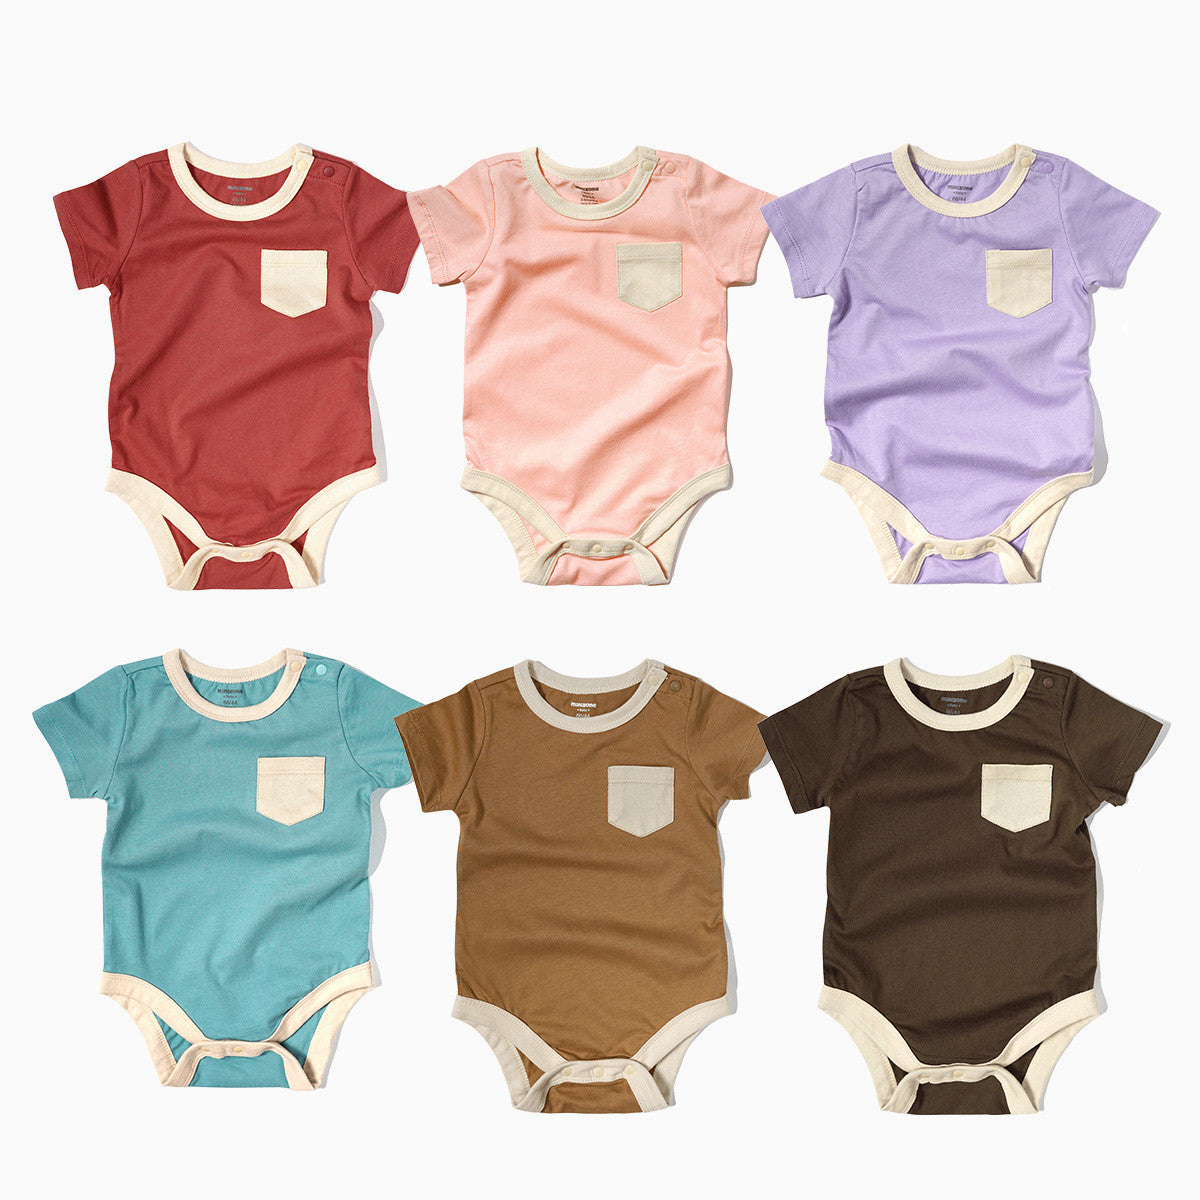 Short-Sleeved Lined Cotton Onesie